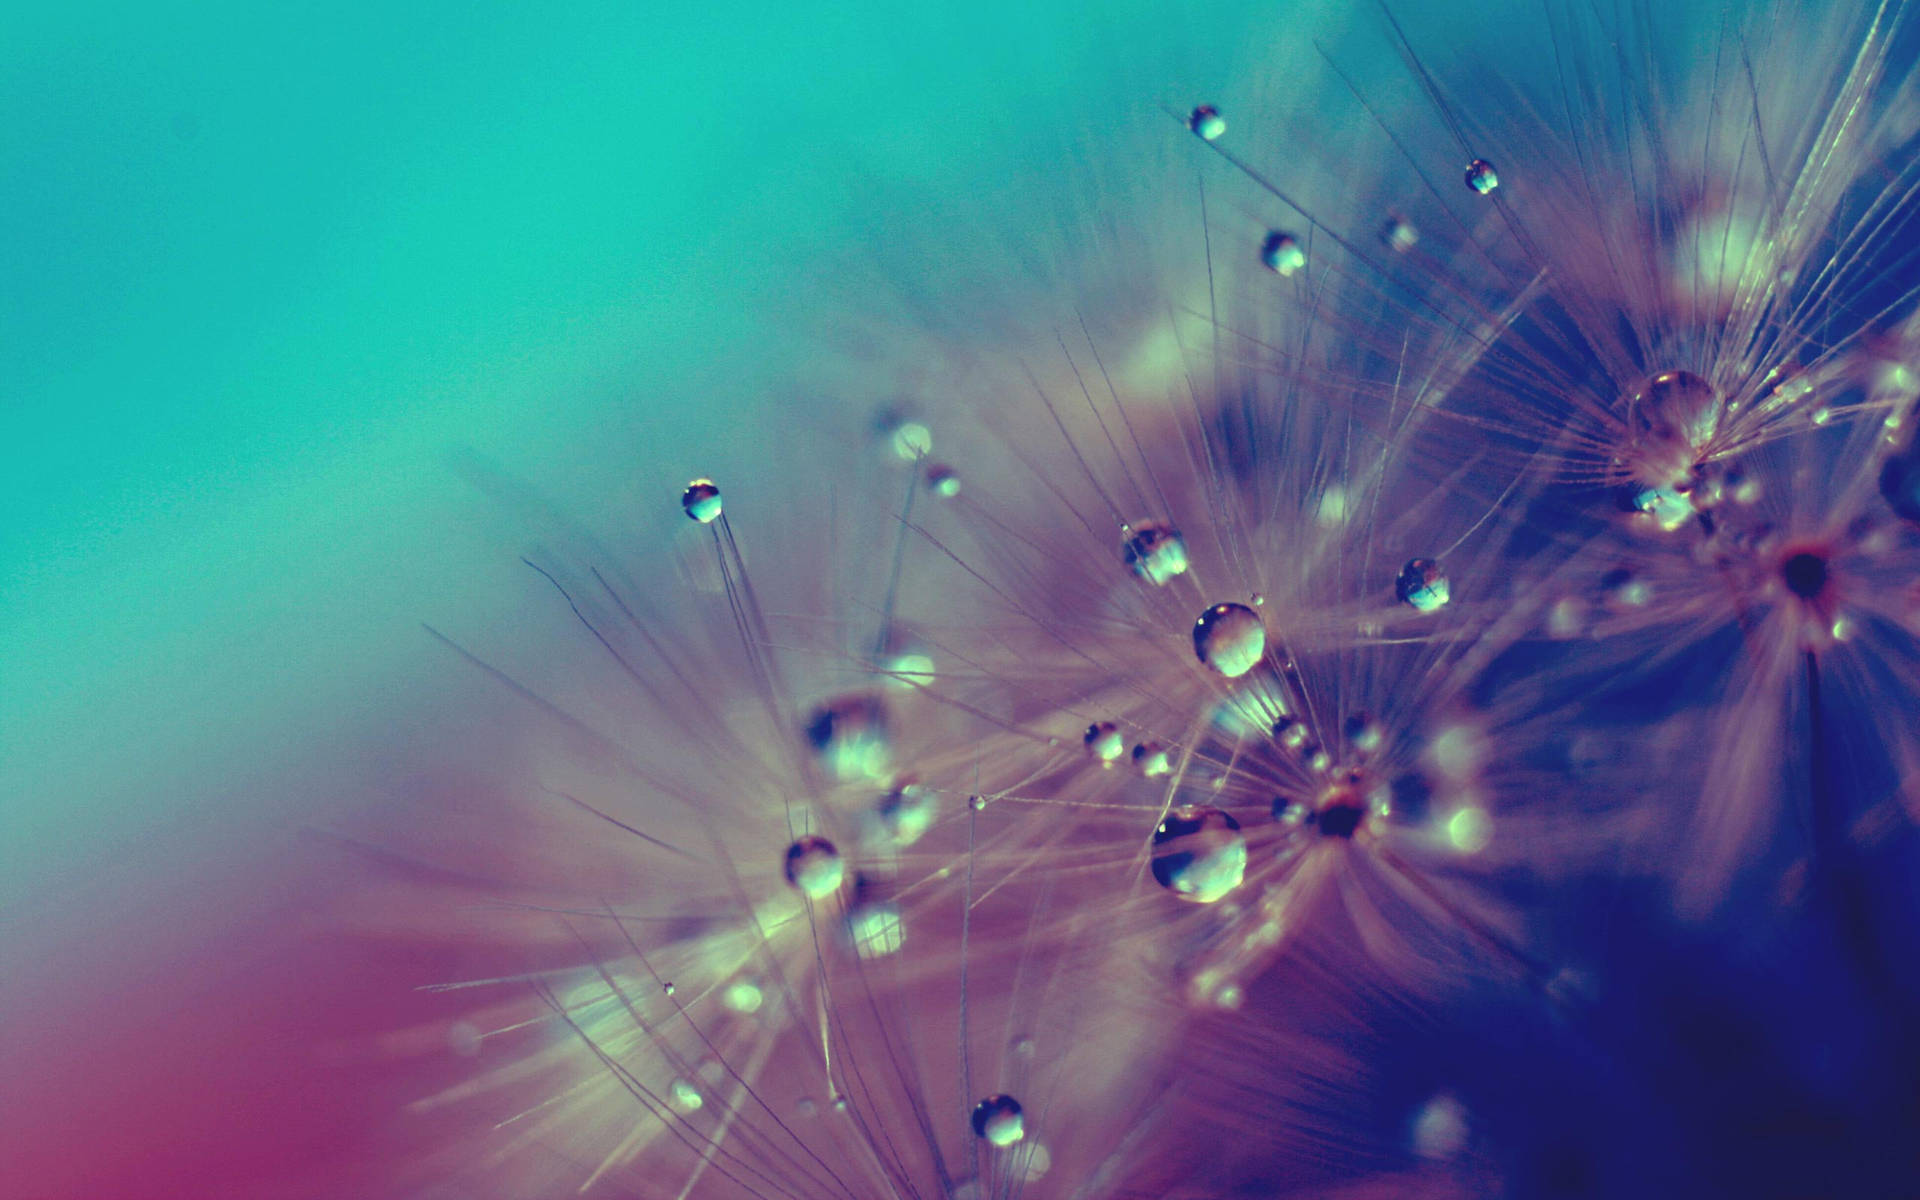 Dandelion Covered In Water Droplets Wallpaper